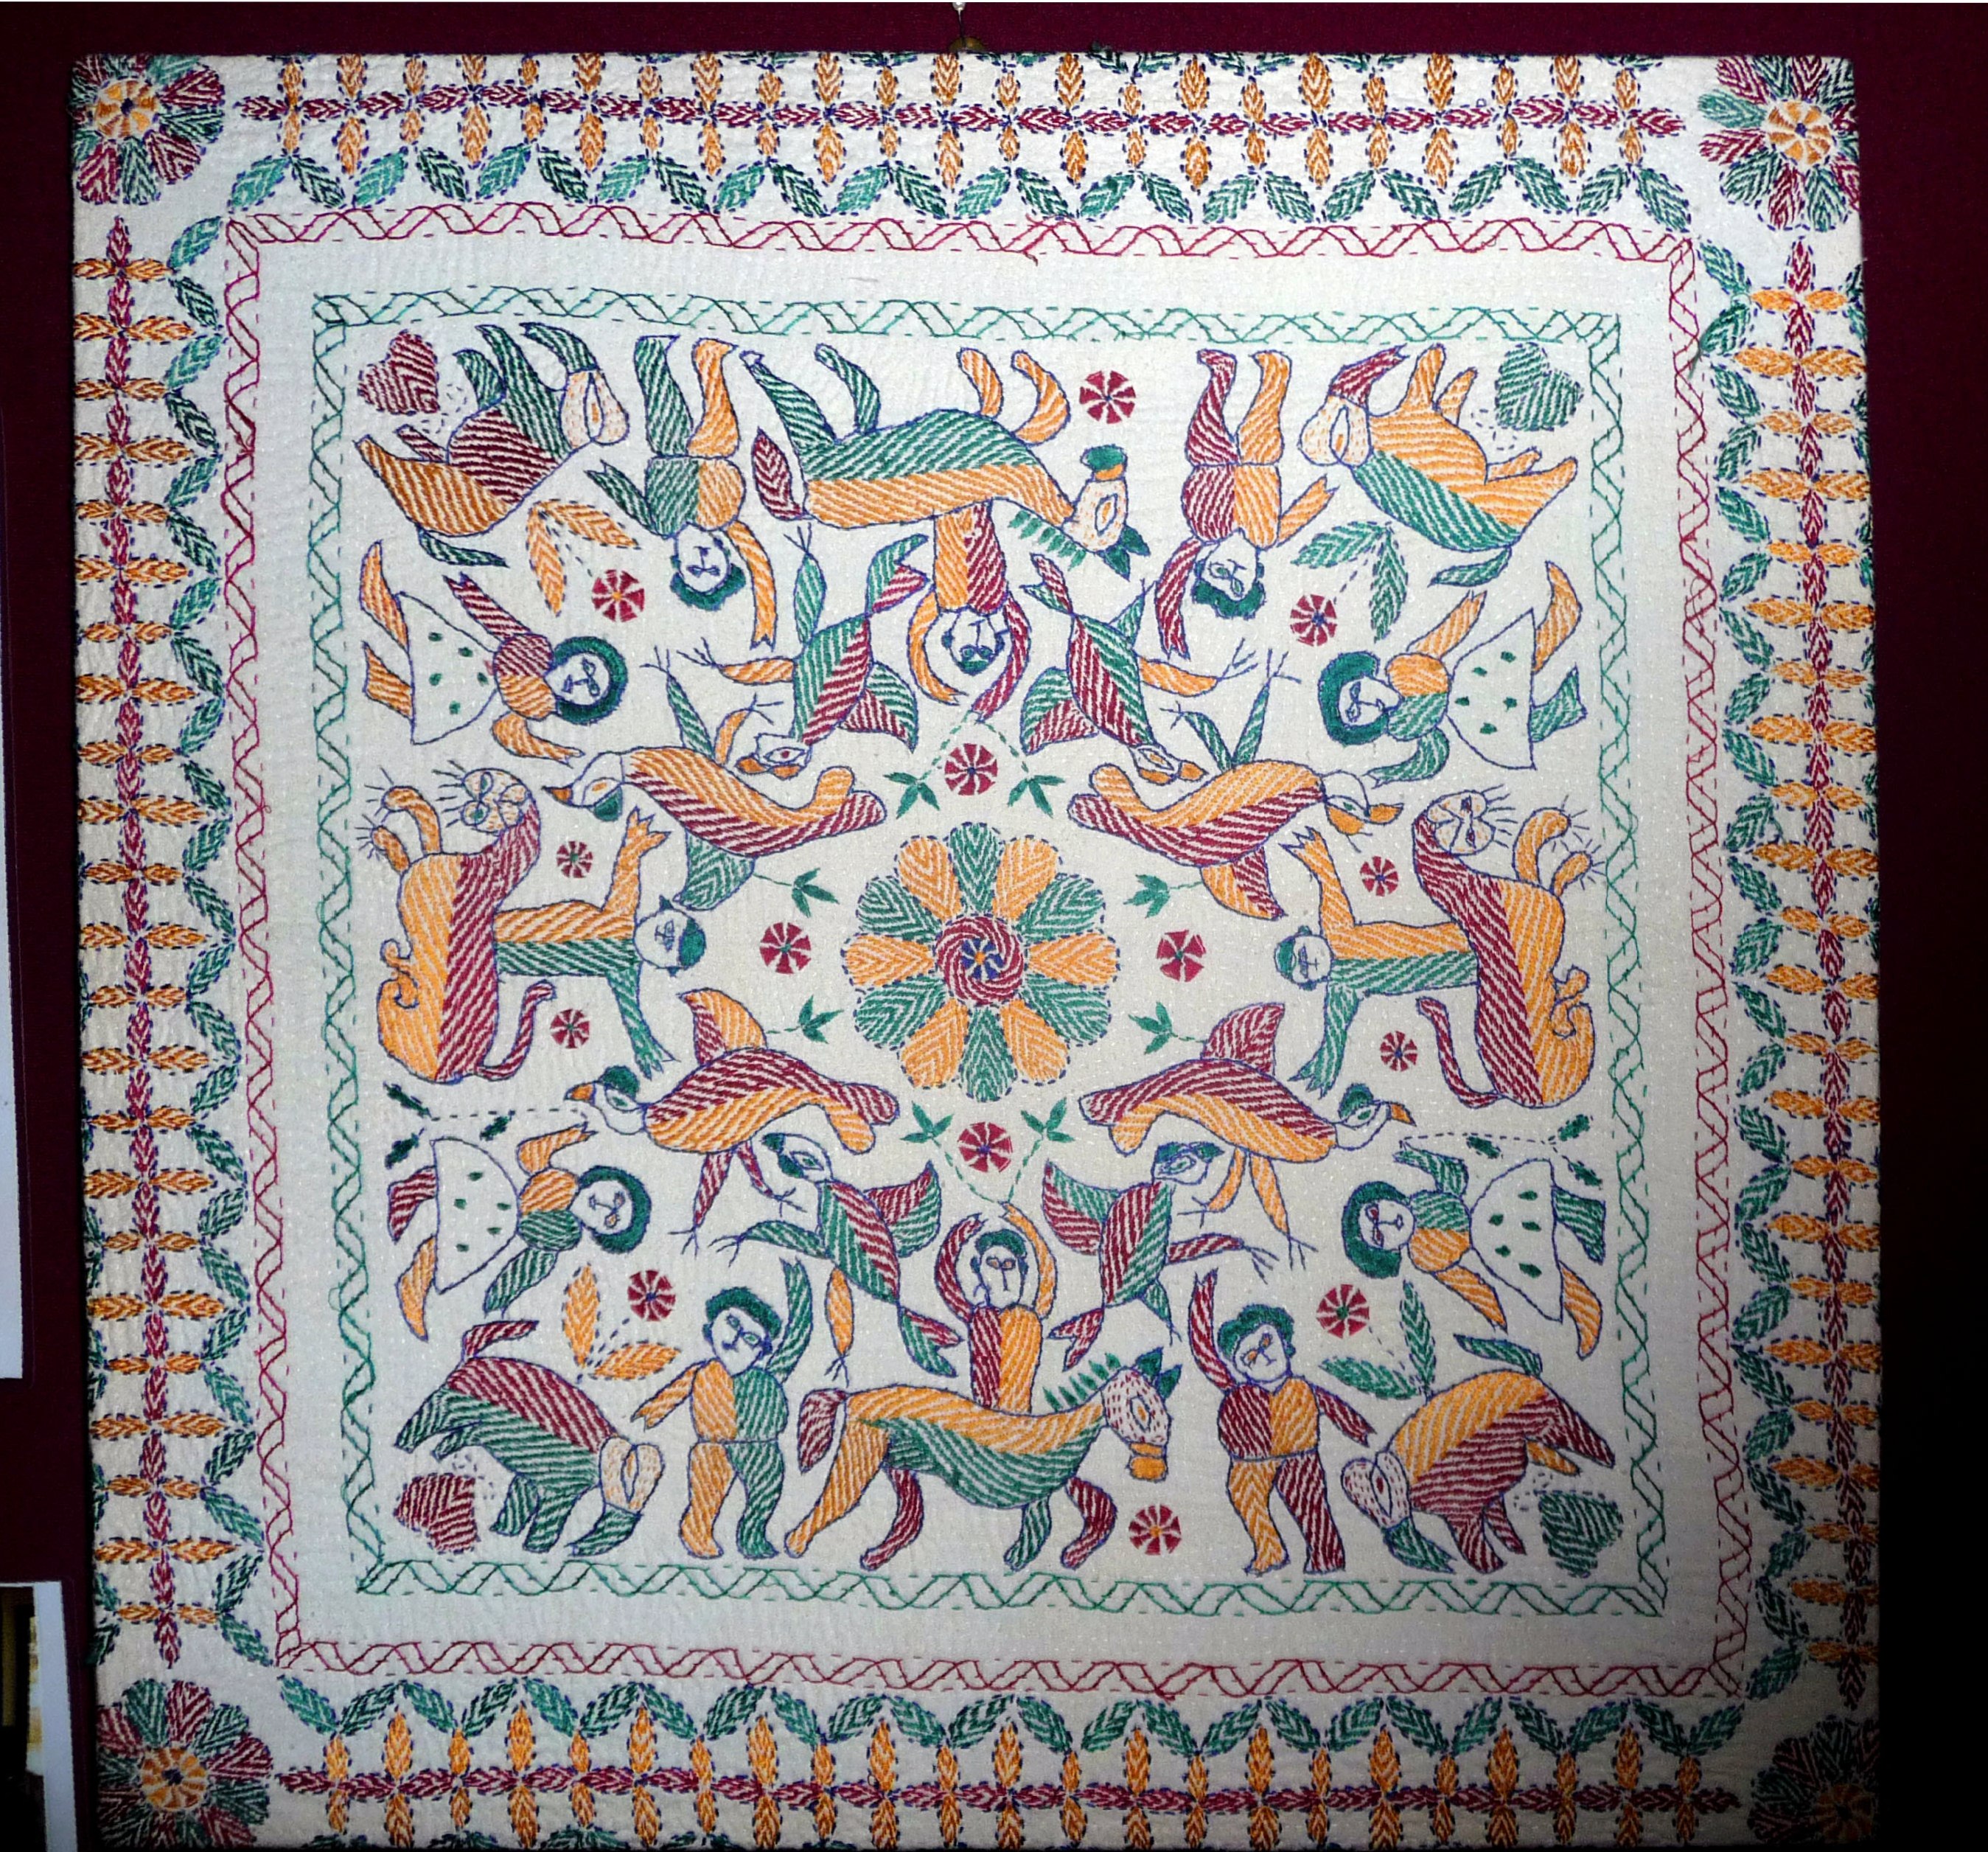 embroidery from Sreepur "Threading Dreams" exhibition, March 2015